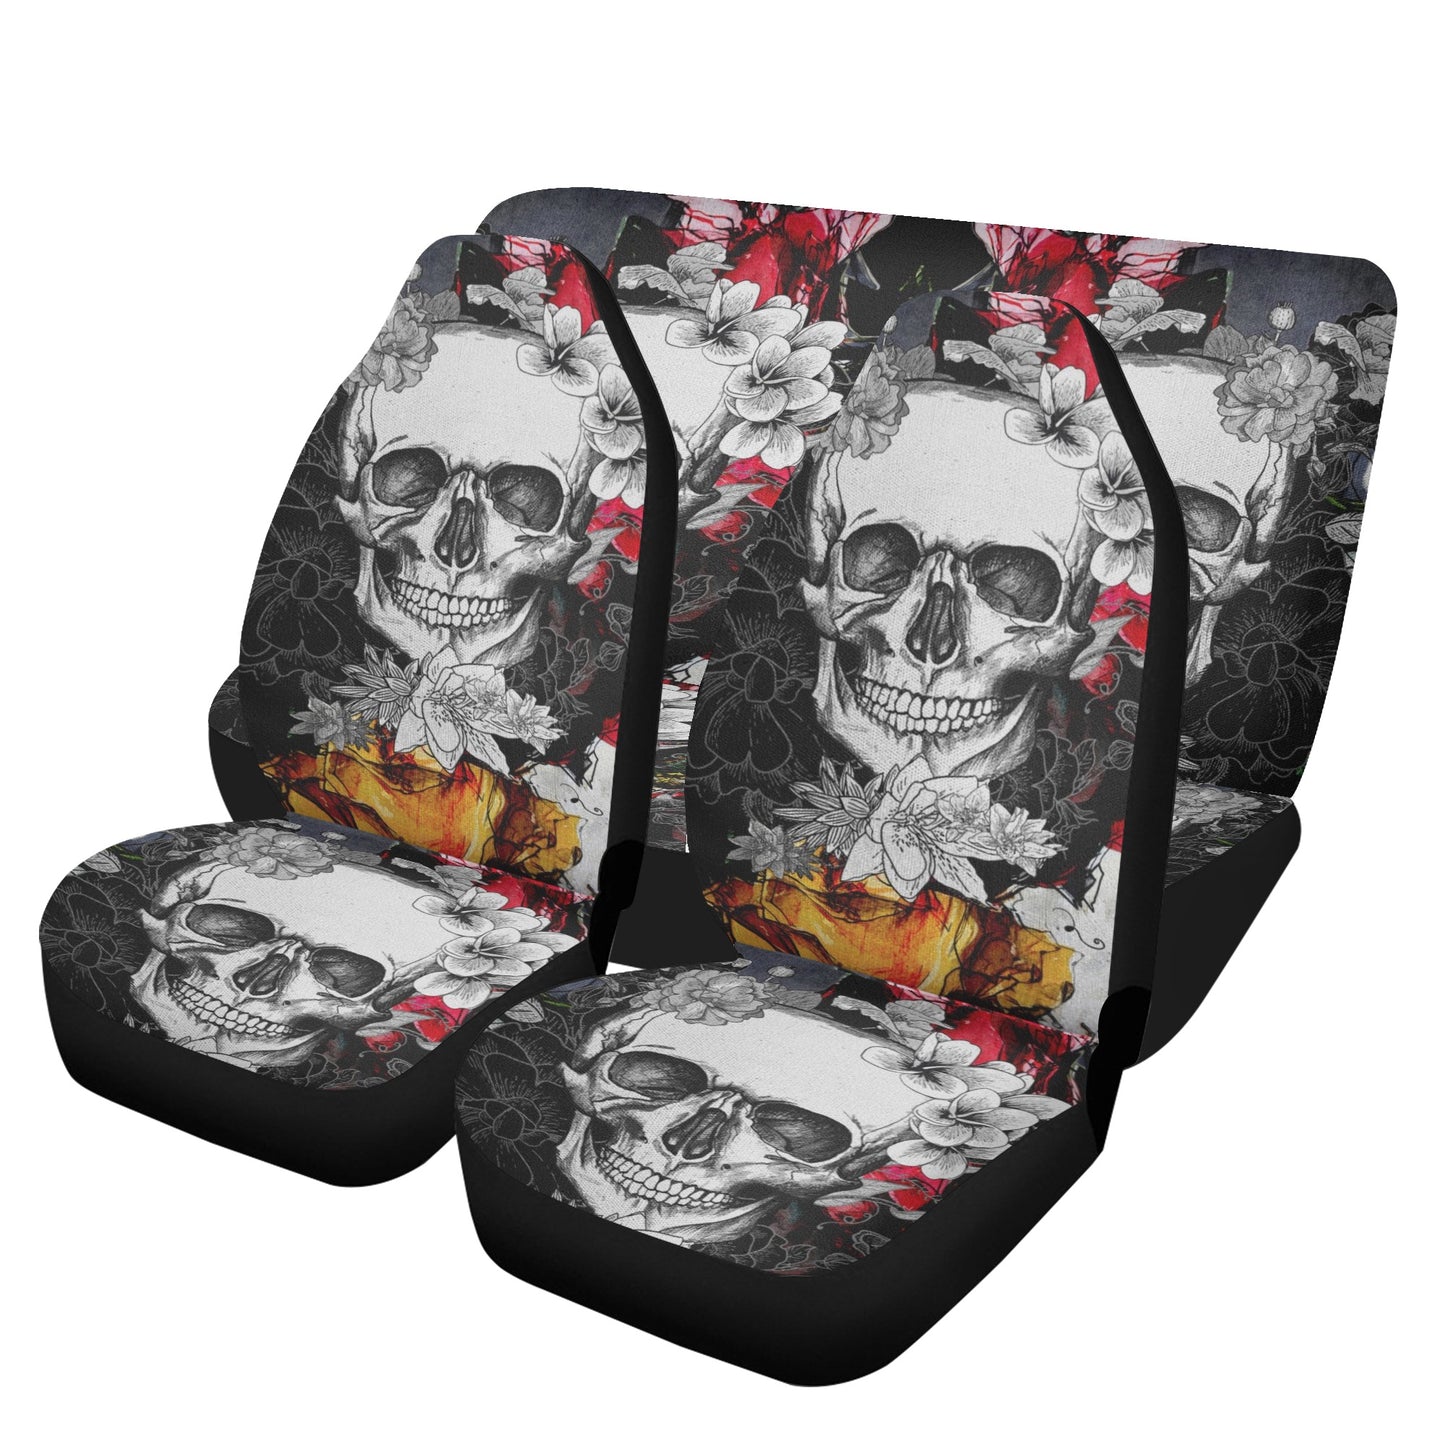 Flaming skull car seat protector cover, skull seat cover for vehicles, grim reaper car seat cushion cover, halloween truck seat cover, grim